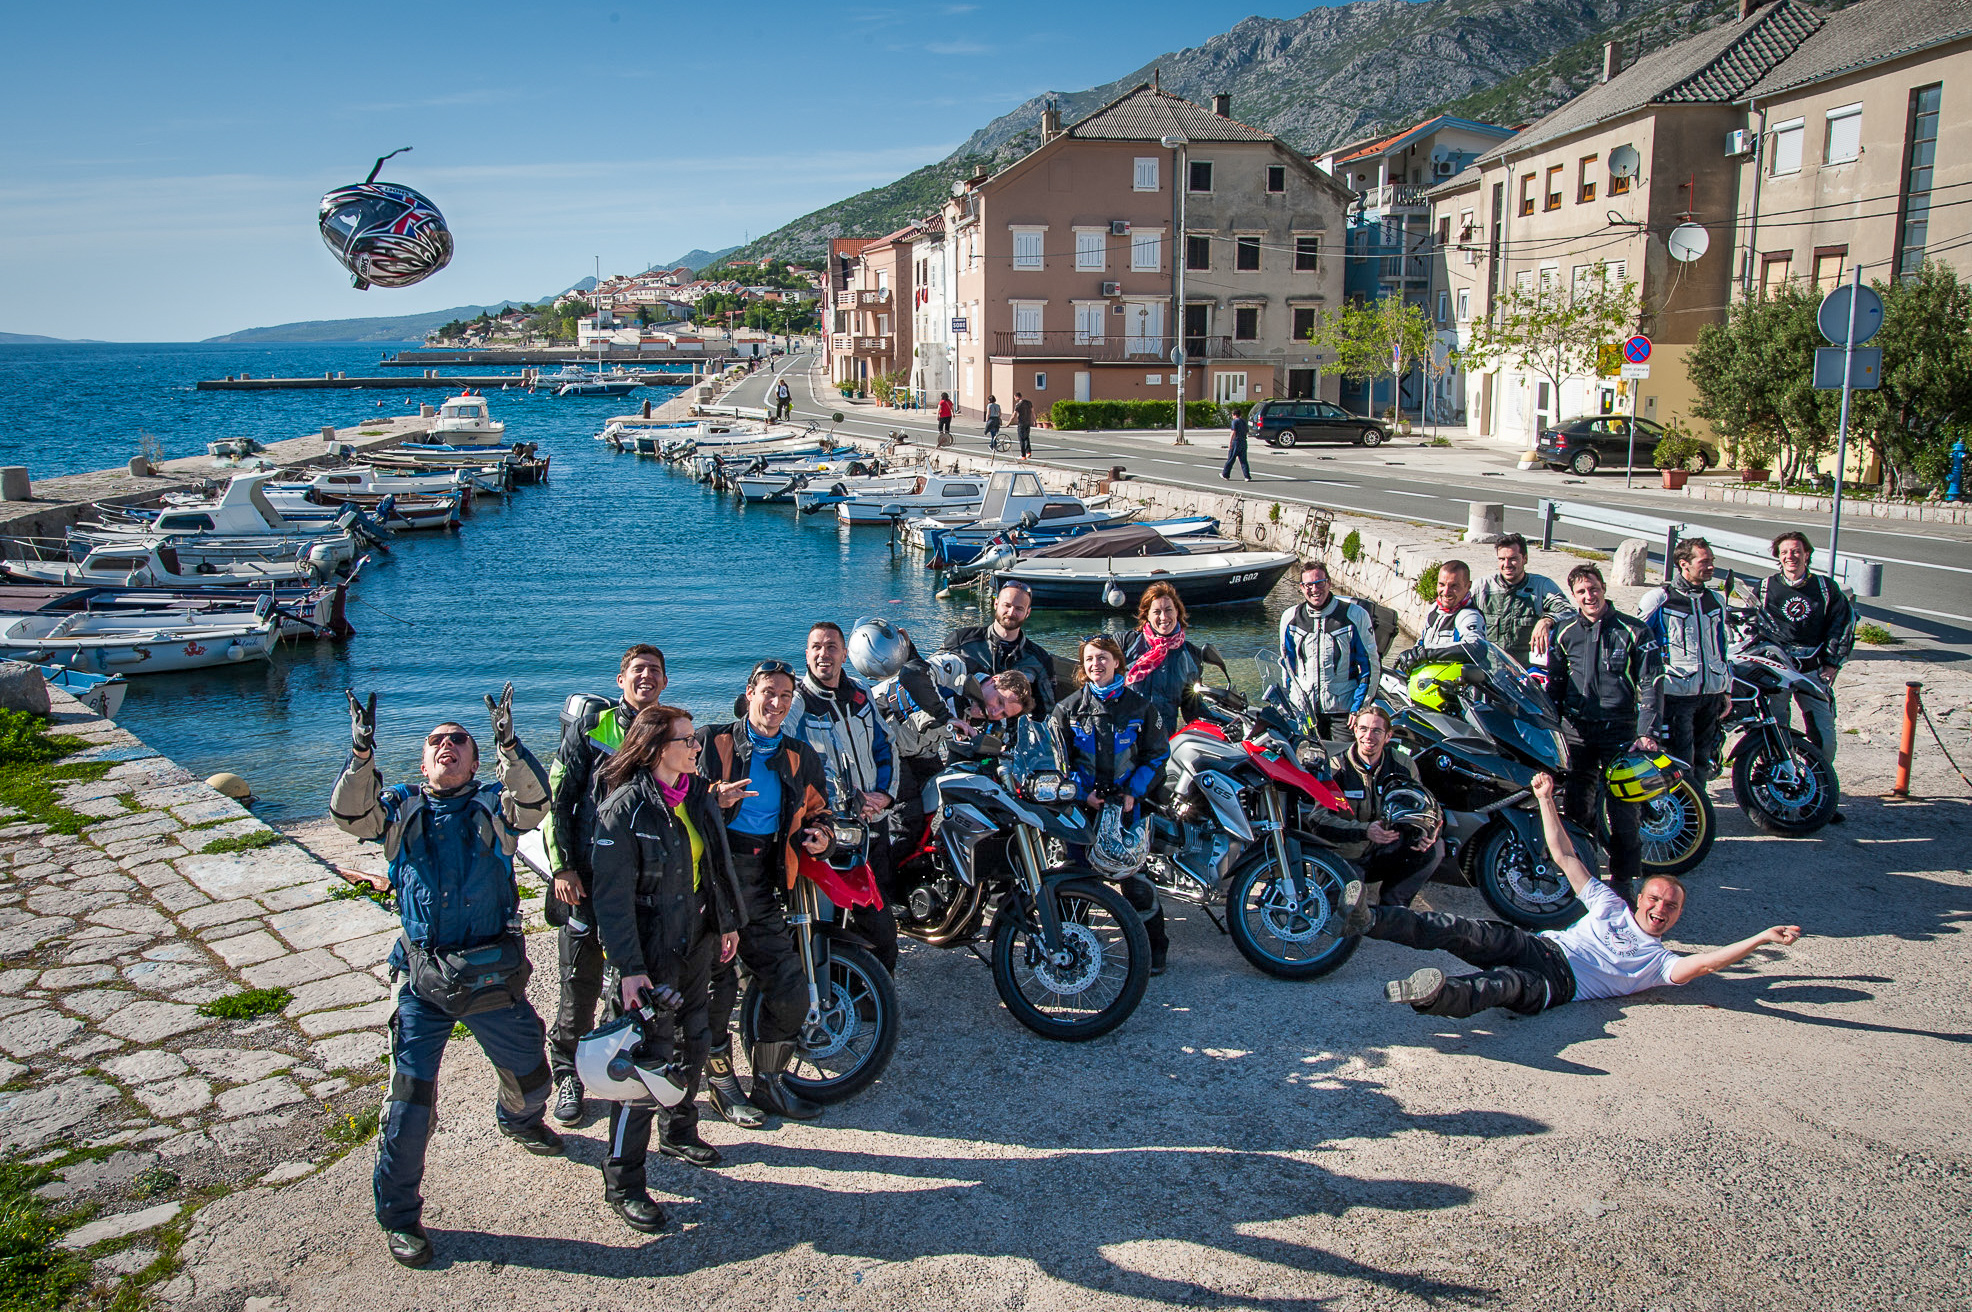 Ladies and Gents, welcome to the Adriatic Moto Tours blog!